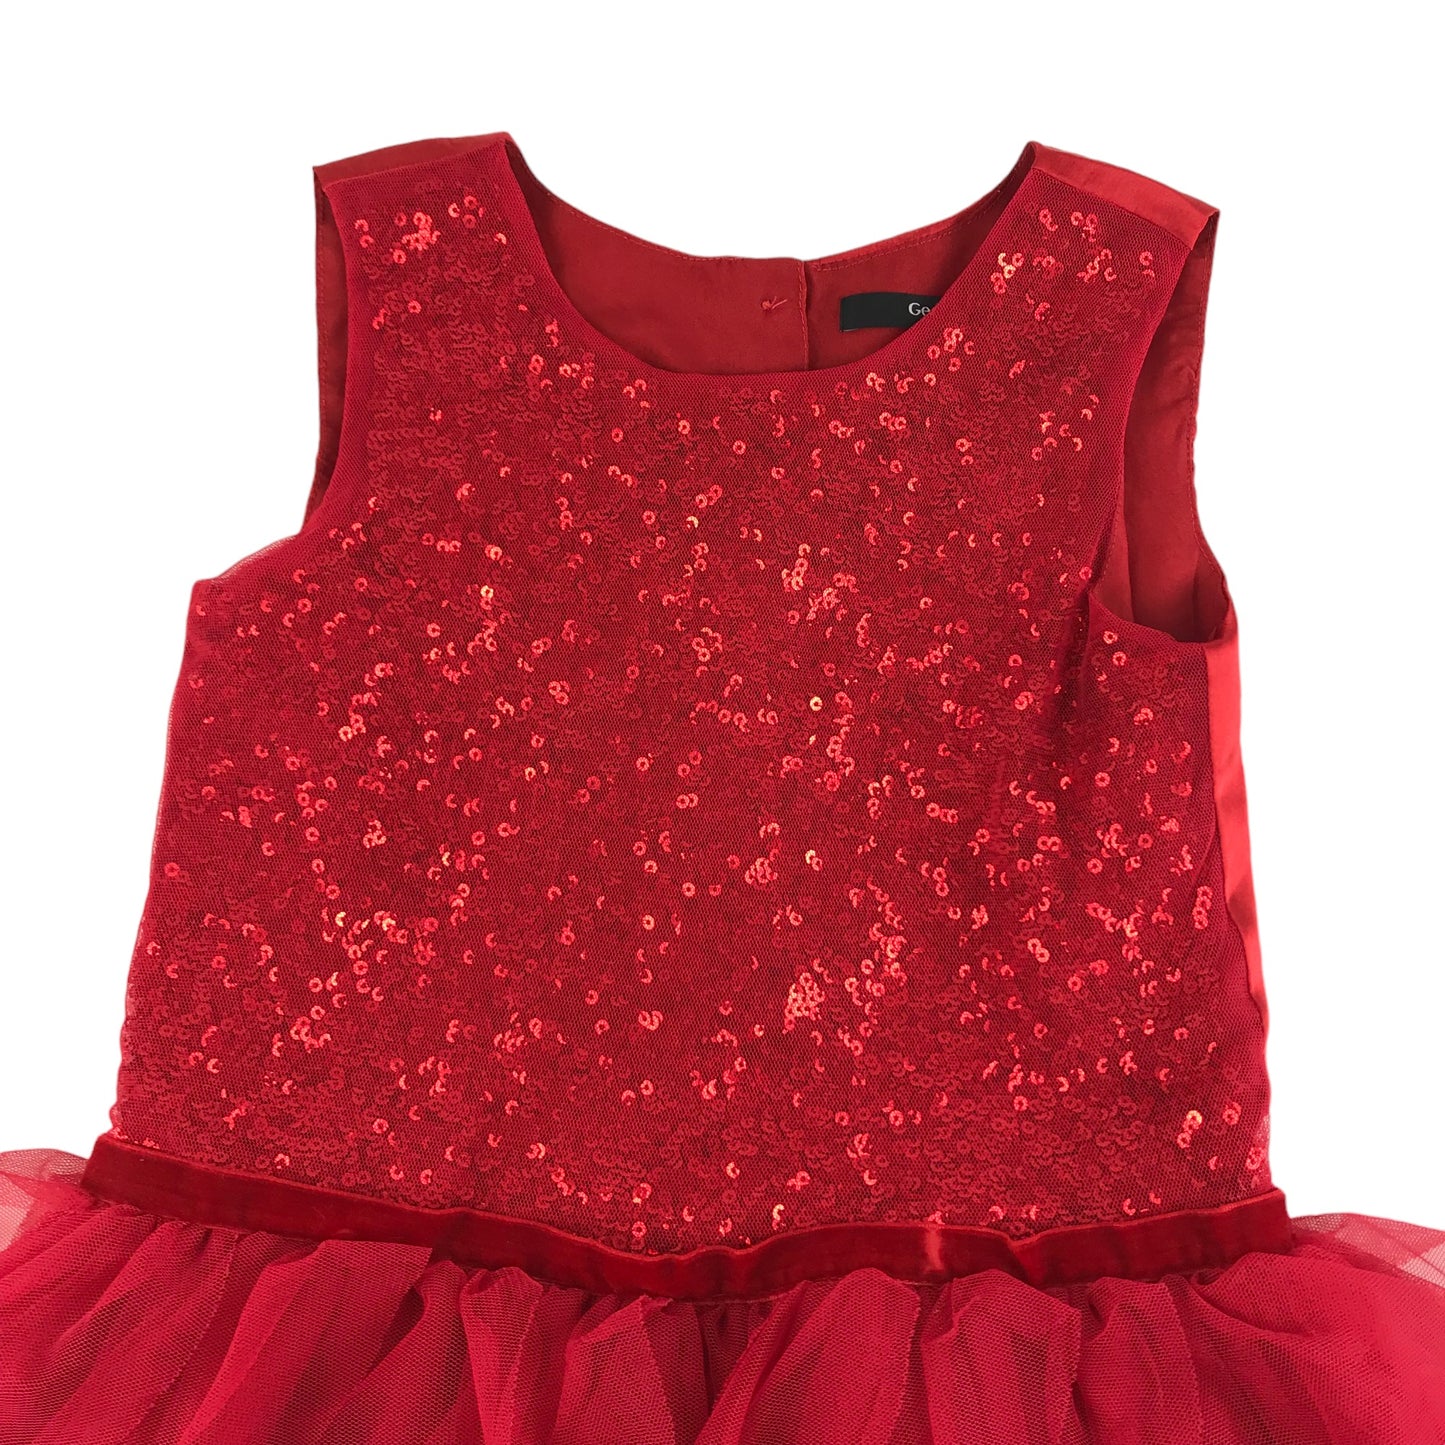 George Dress Age 5 Red Sparkly Sequin Top with Frilled Tulle Skirt